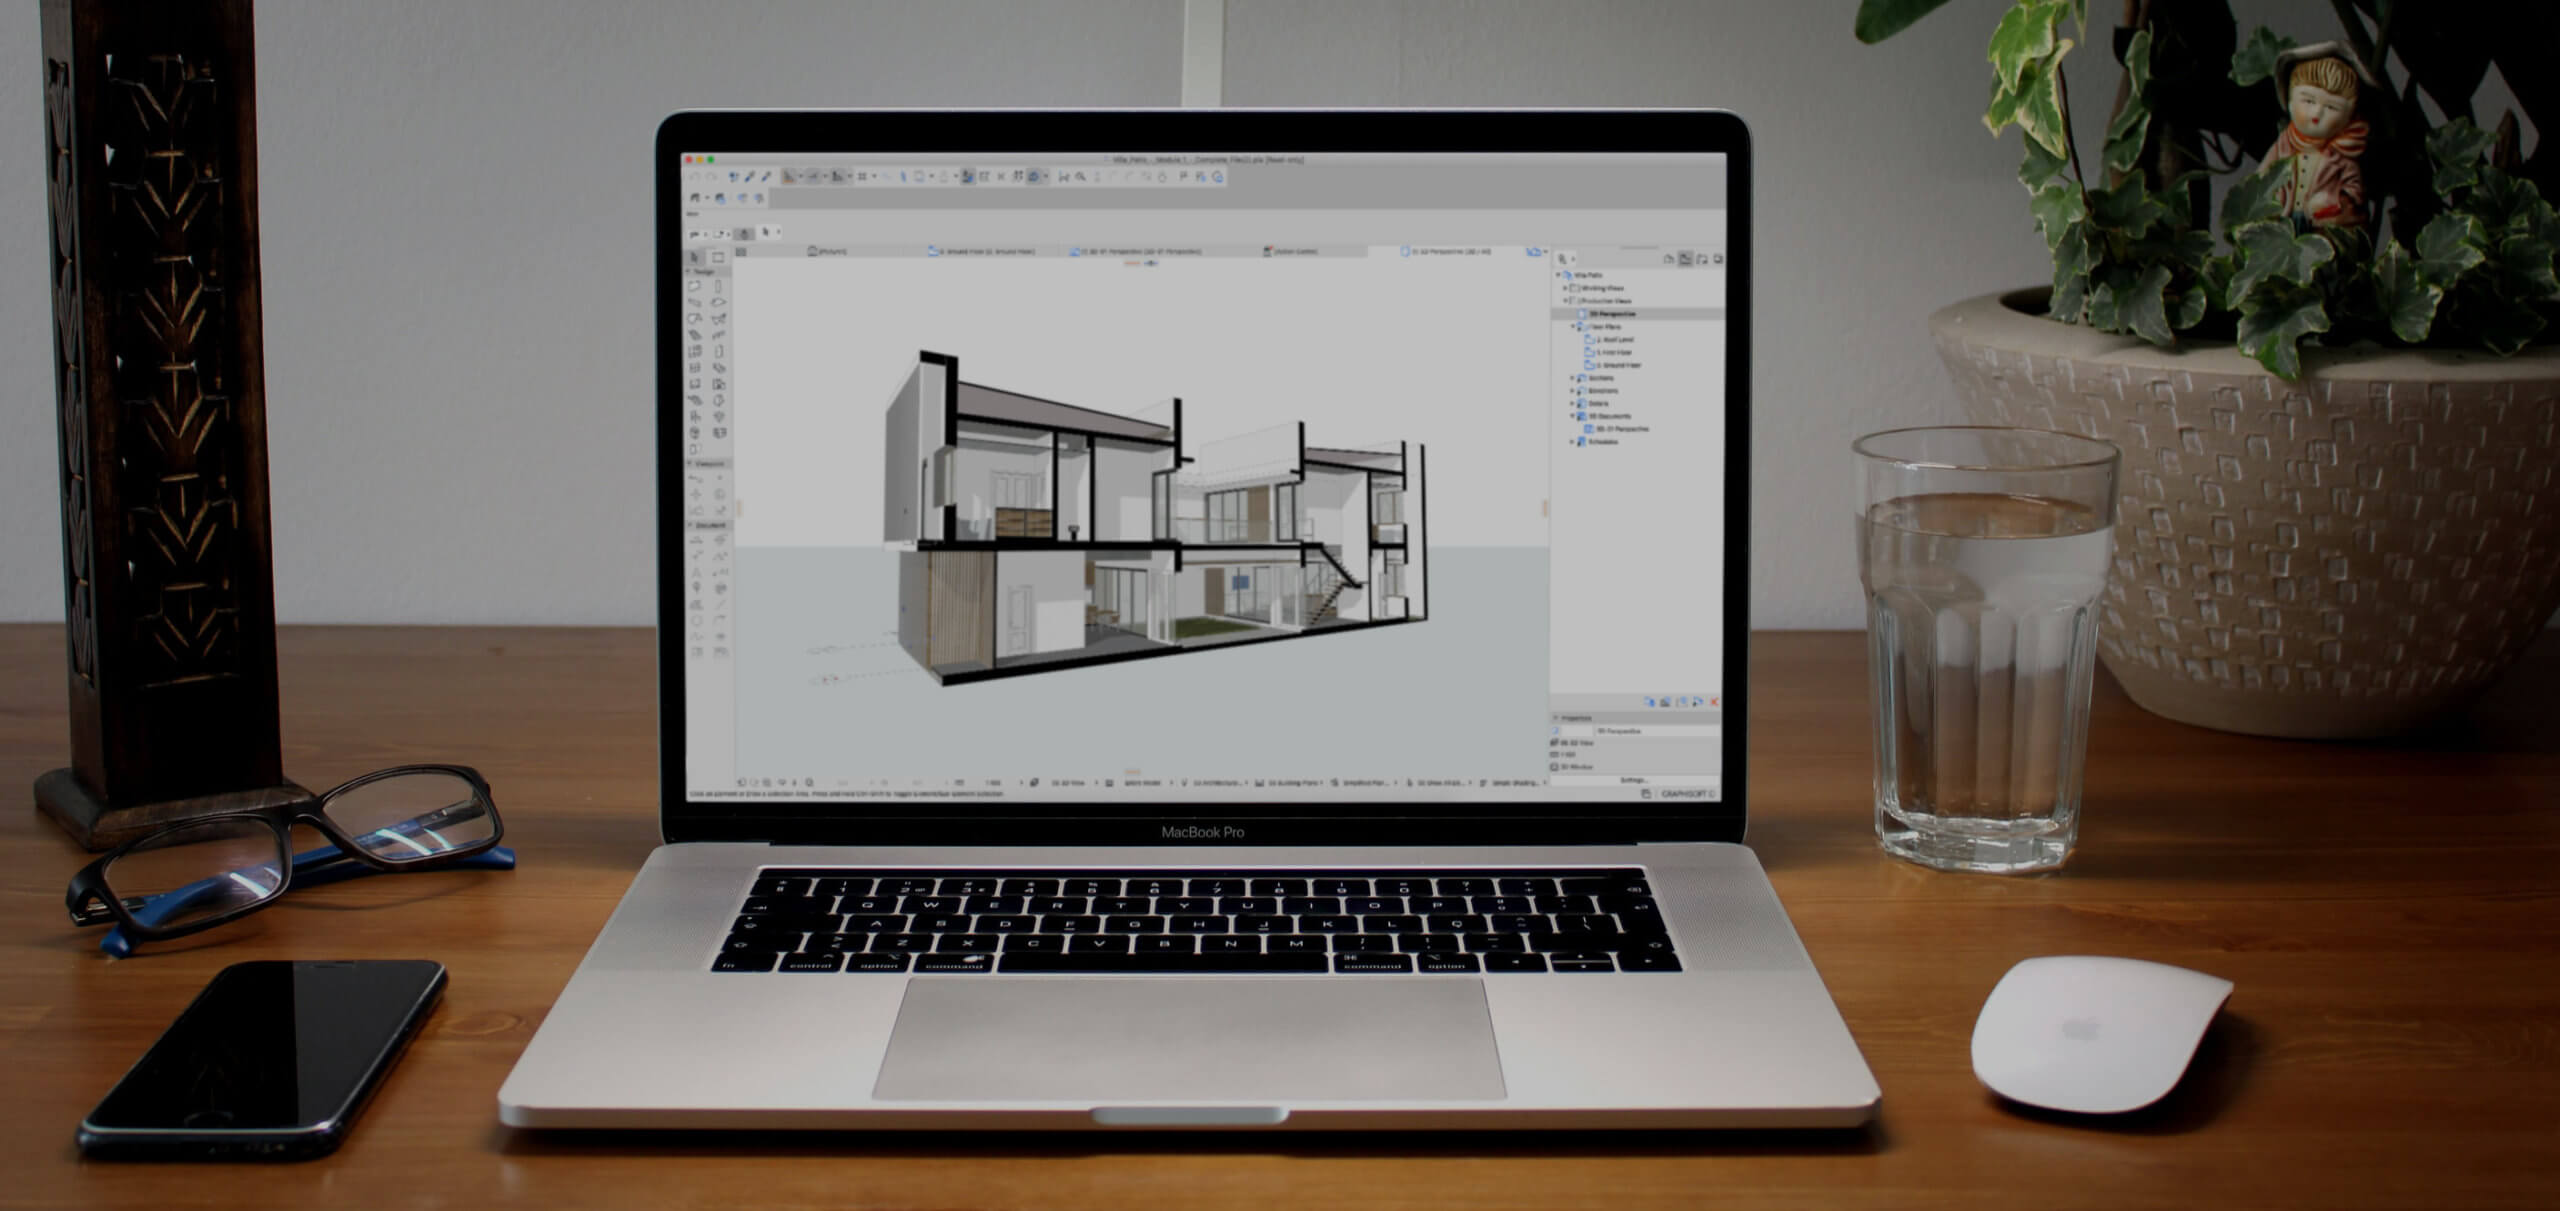 download archicad 19 home plans